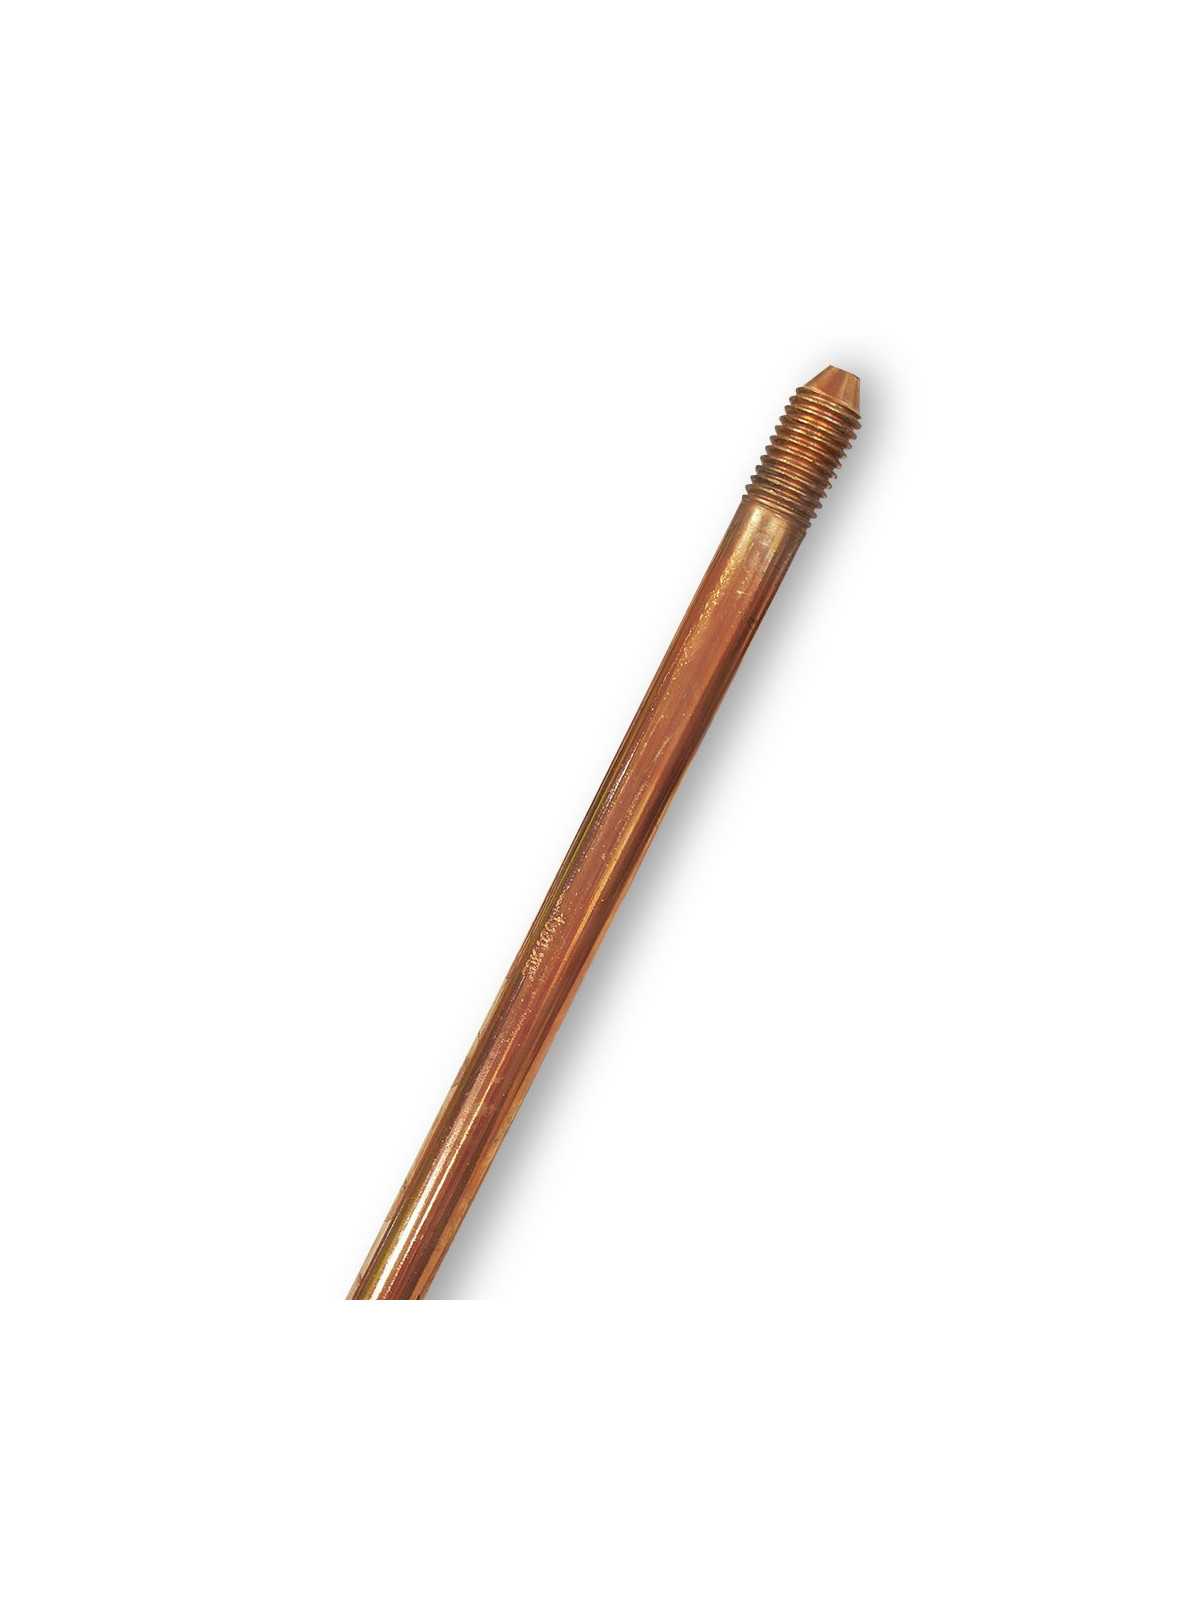 Ground rod threaded copper-plated steel